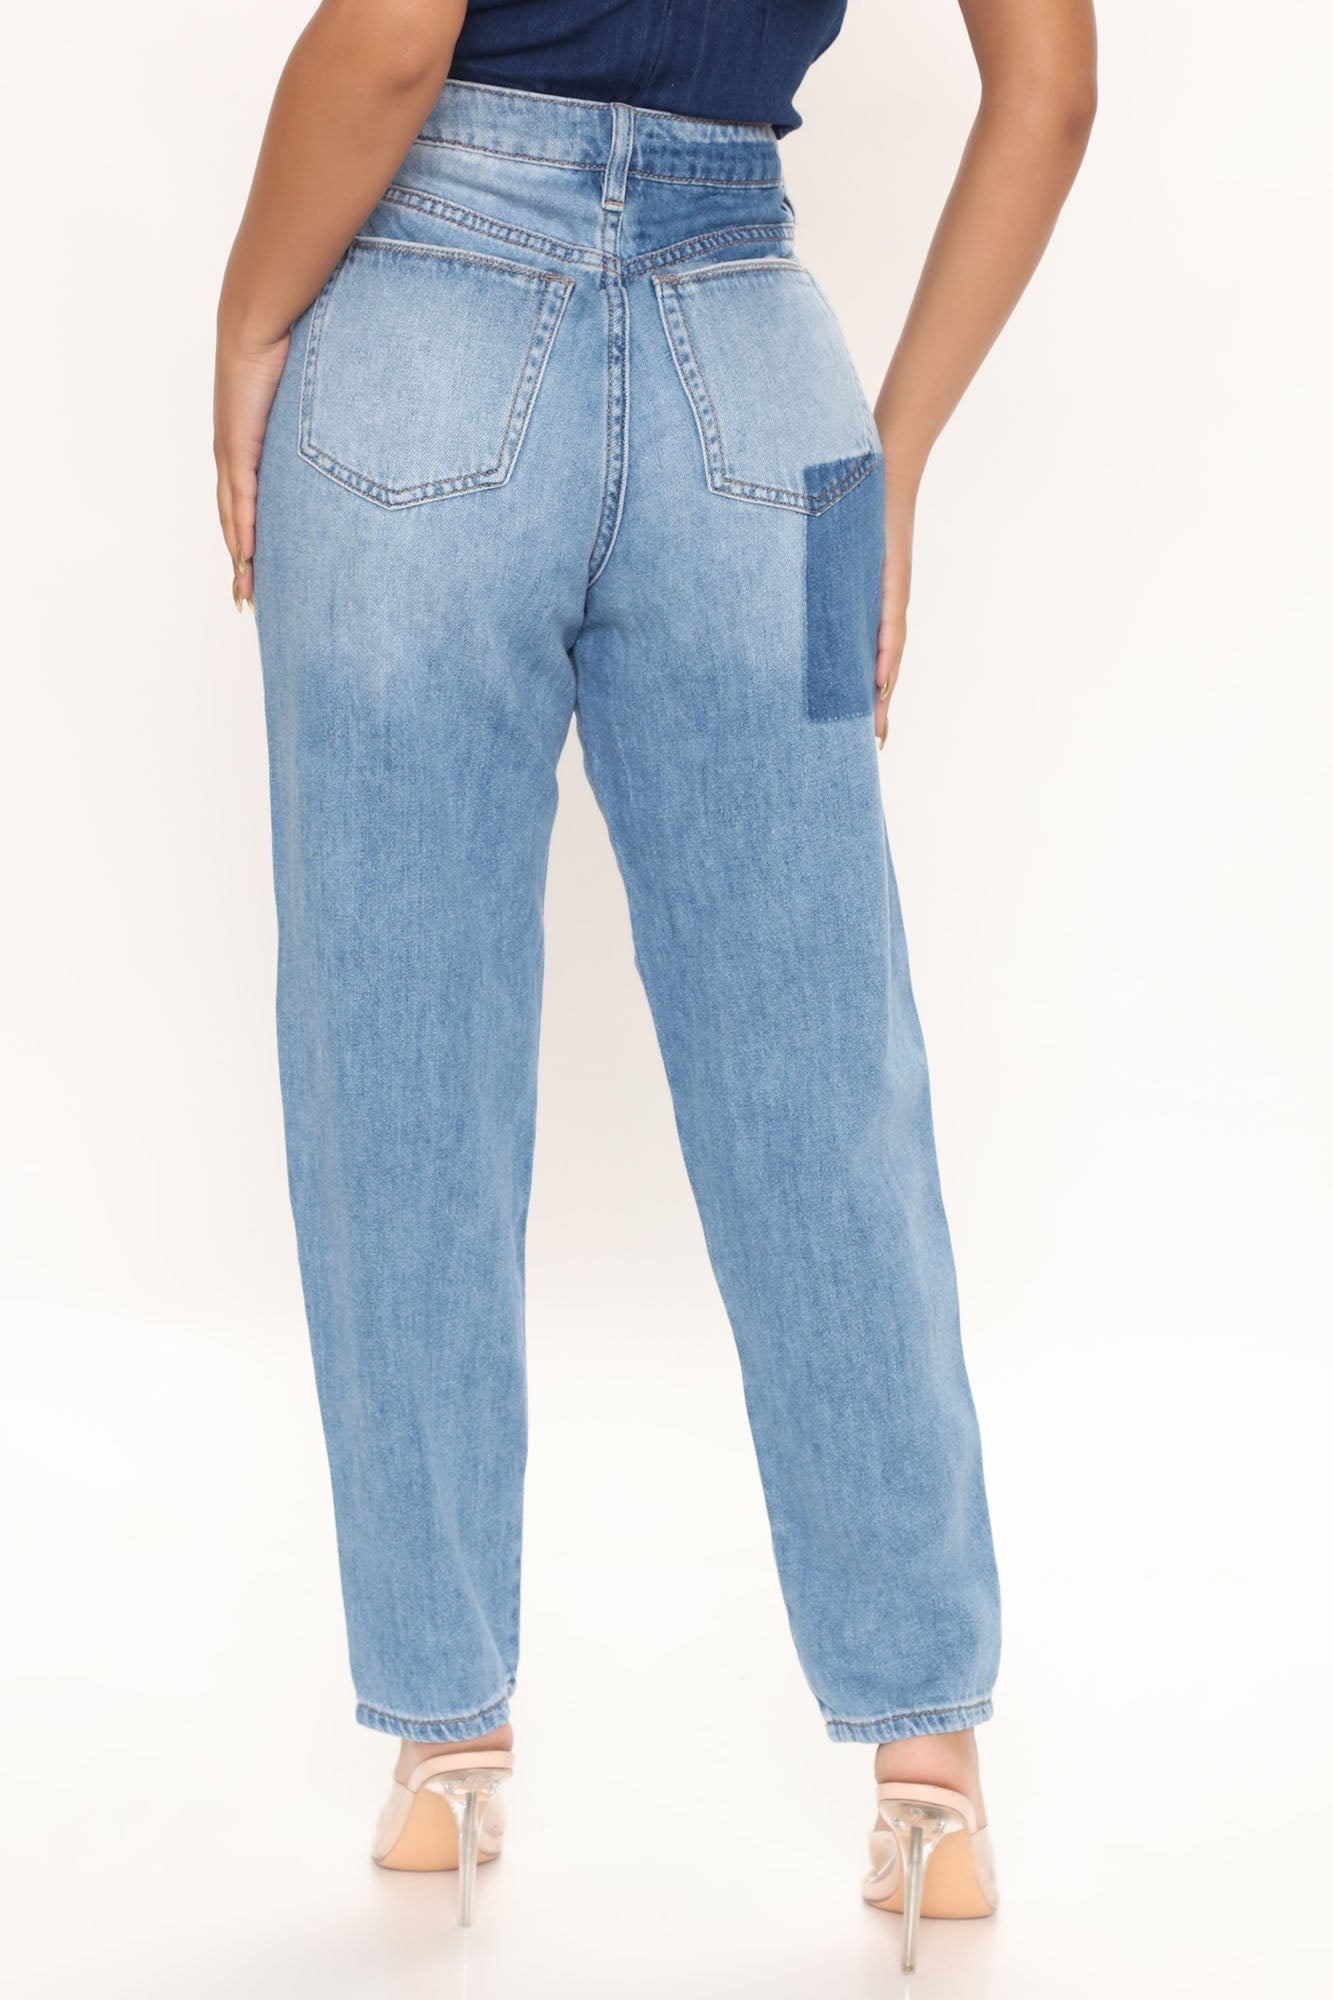 Like A Dream Patchwork Balloon Jeans - Light Blue Wash